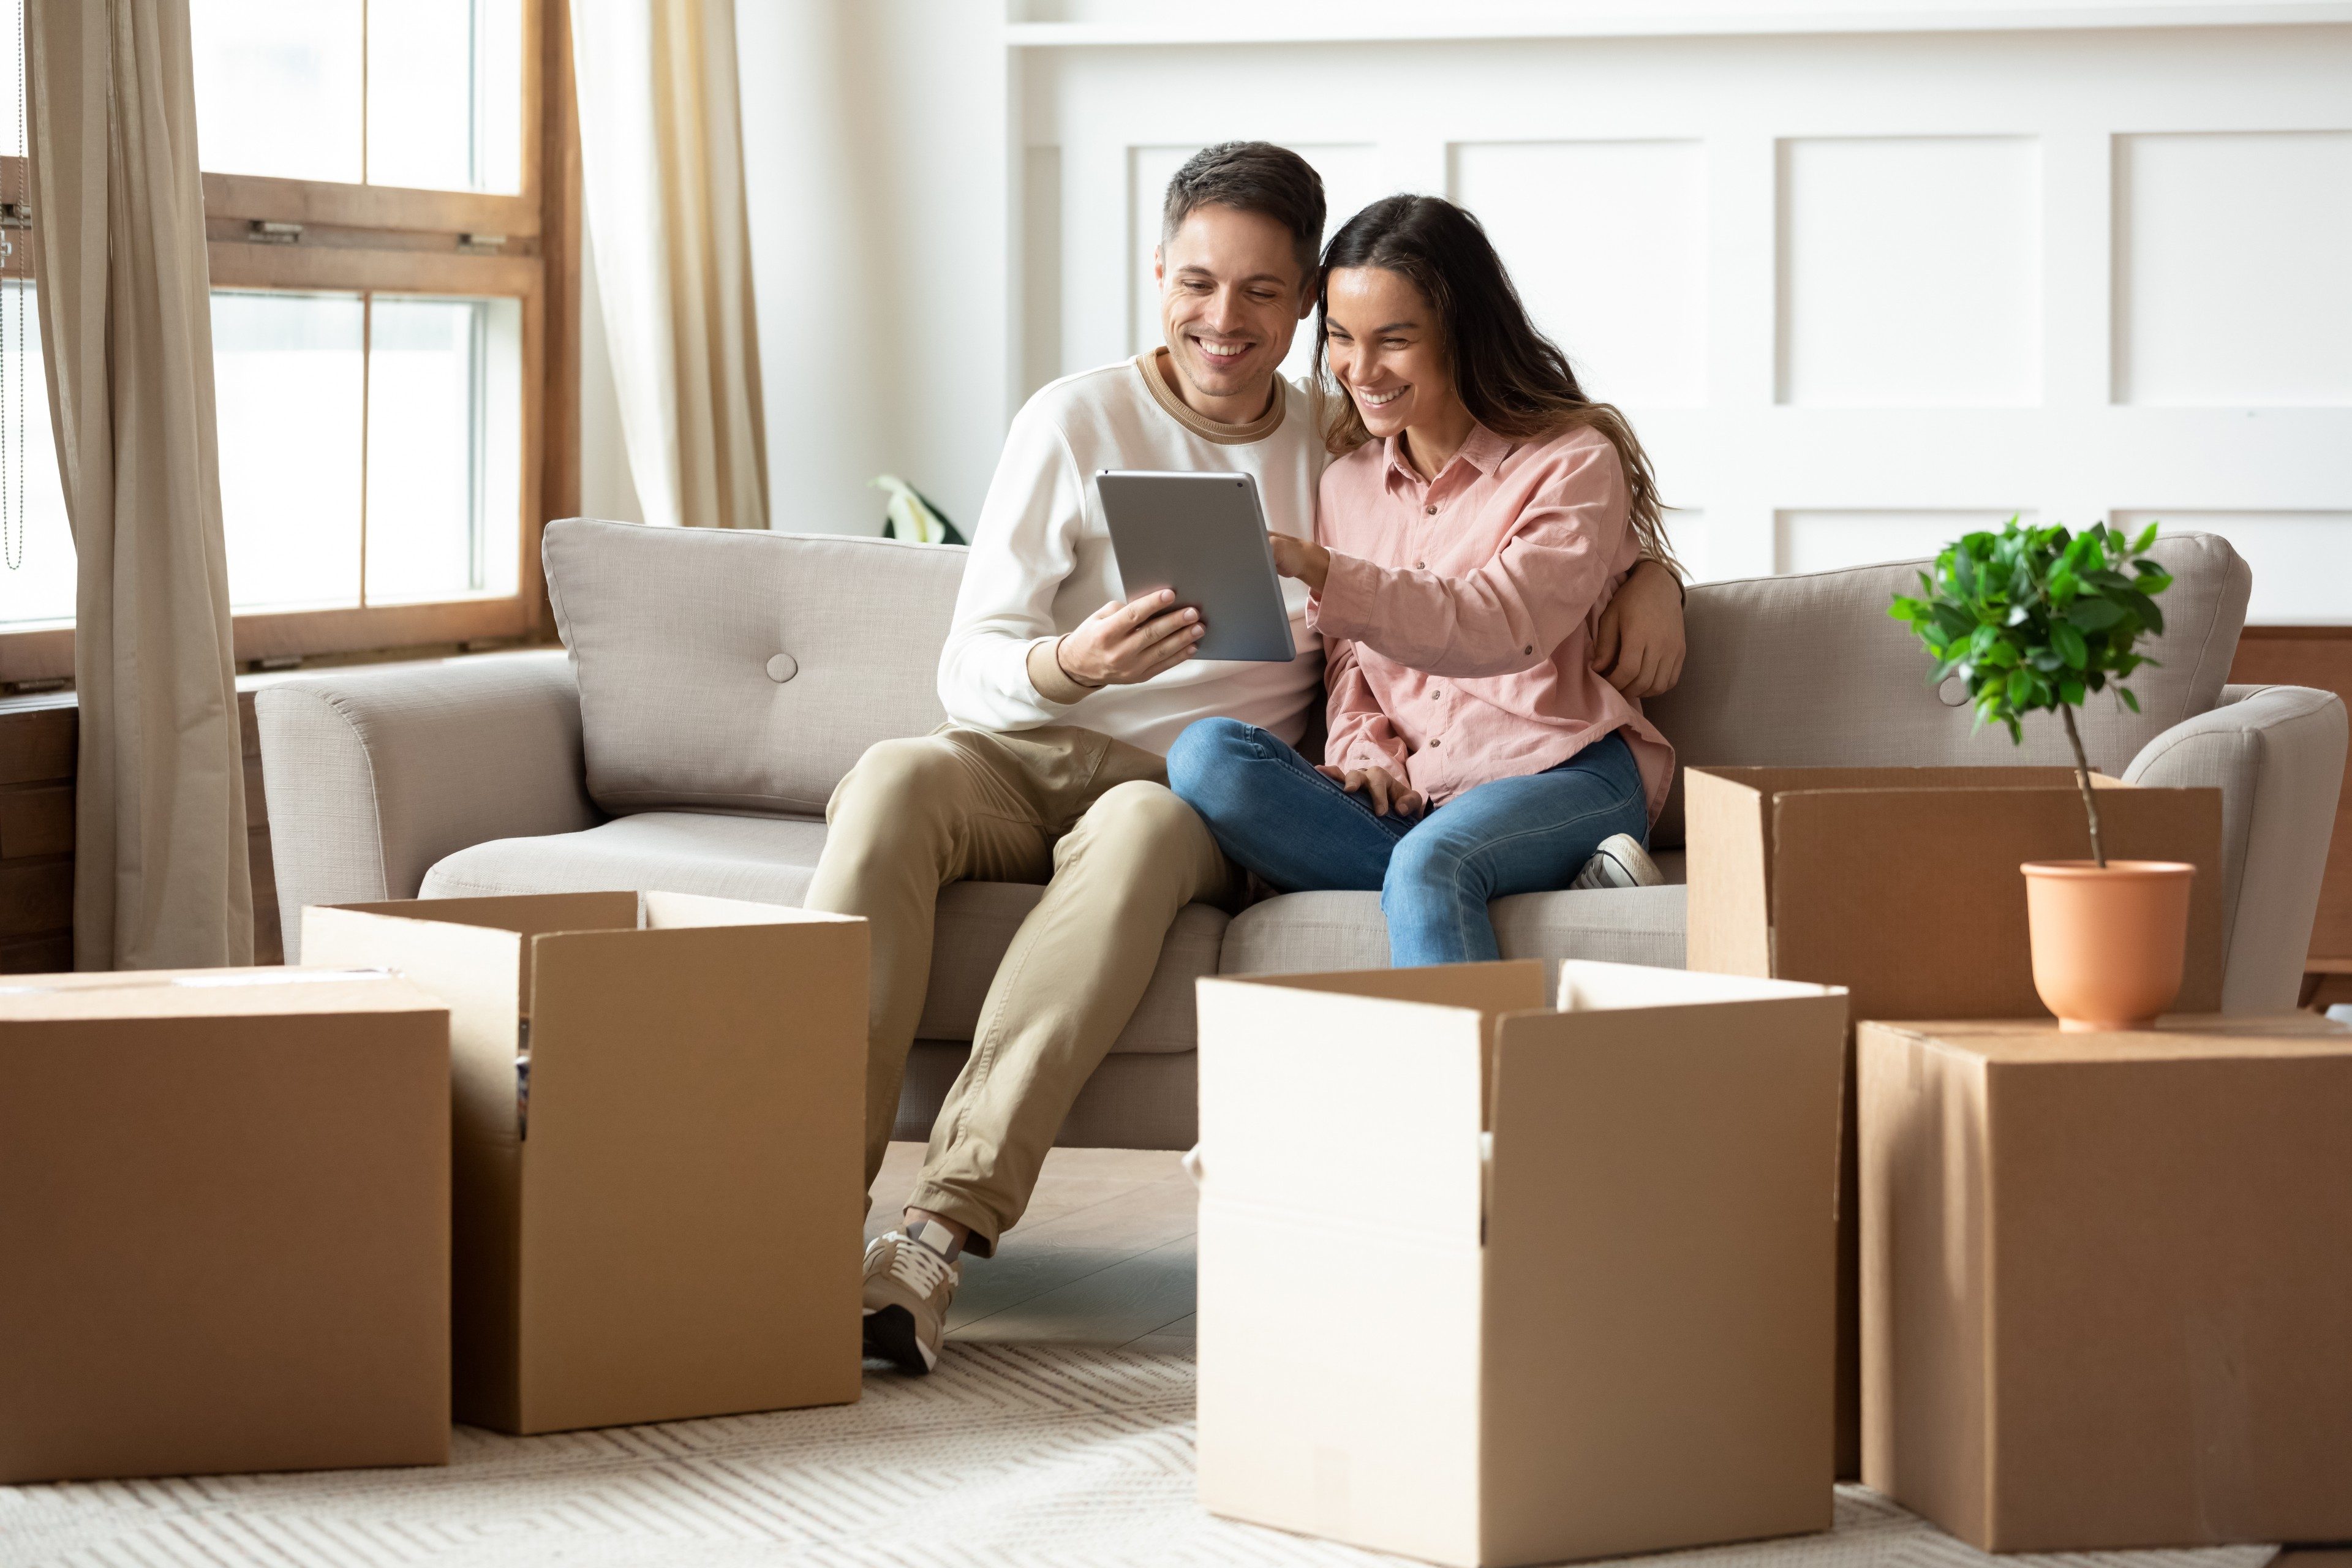 Happy couple sitting on sofa surrounded by heap of cardboard boxes, using tablet choose goods and furniture for new home, resting at moving day at first dwelling. E-commerce retail services concept